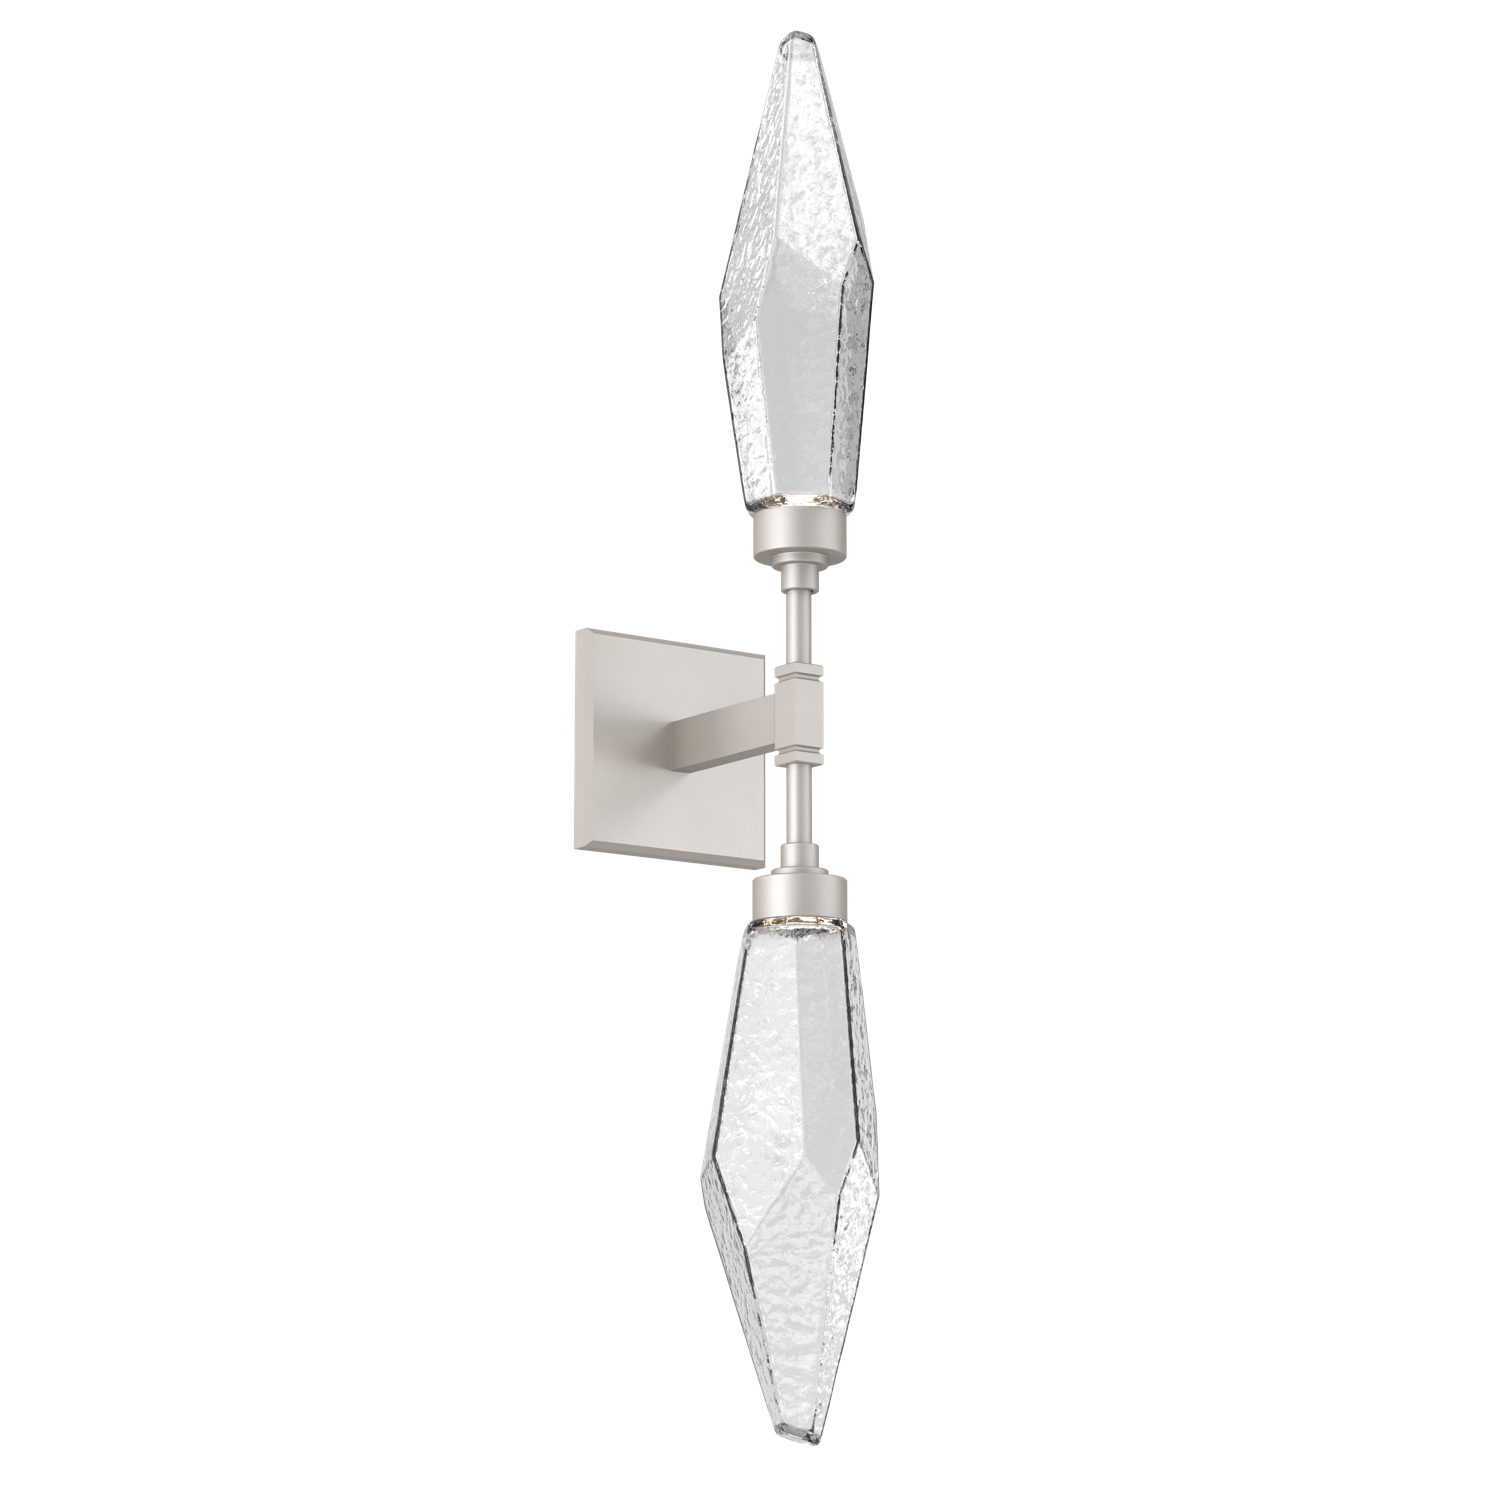 IDB0050-02-BS-CC-Hammerton-Studio-Rock-Crystal-wall-sconce-with-beige-silver-finish-and-clear-glass-shades-and-LED-lamping